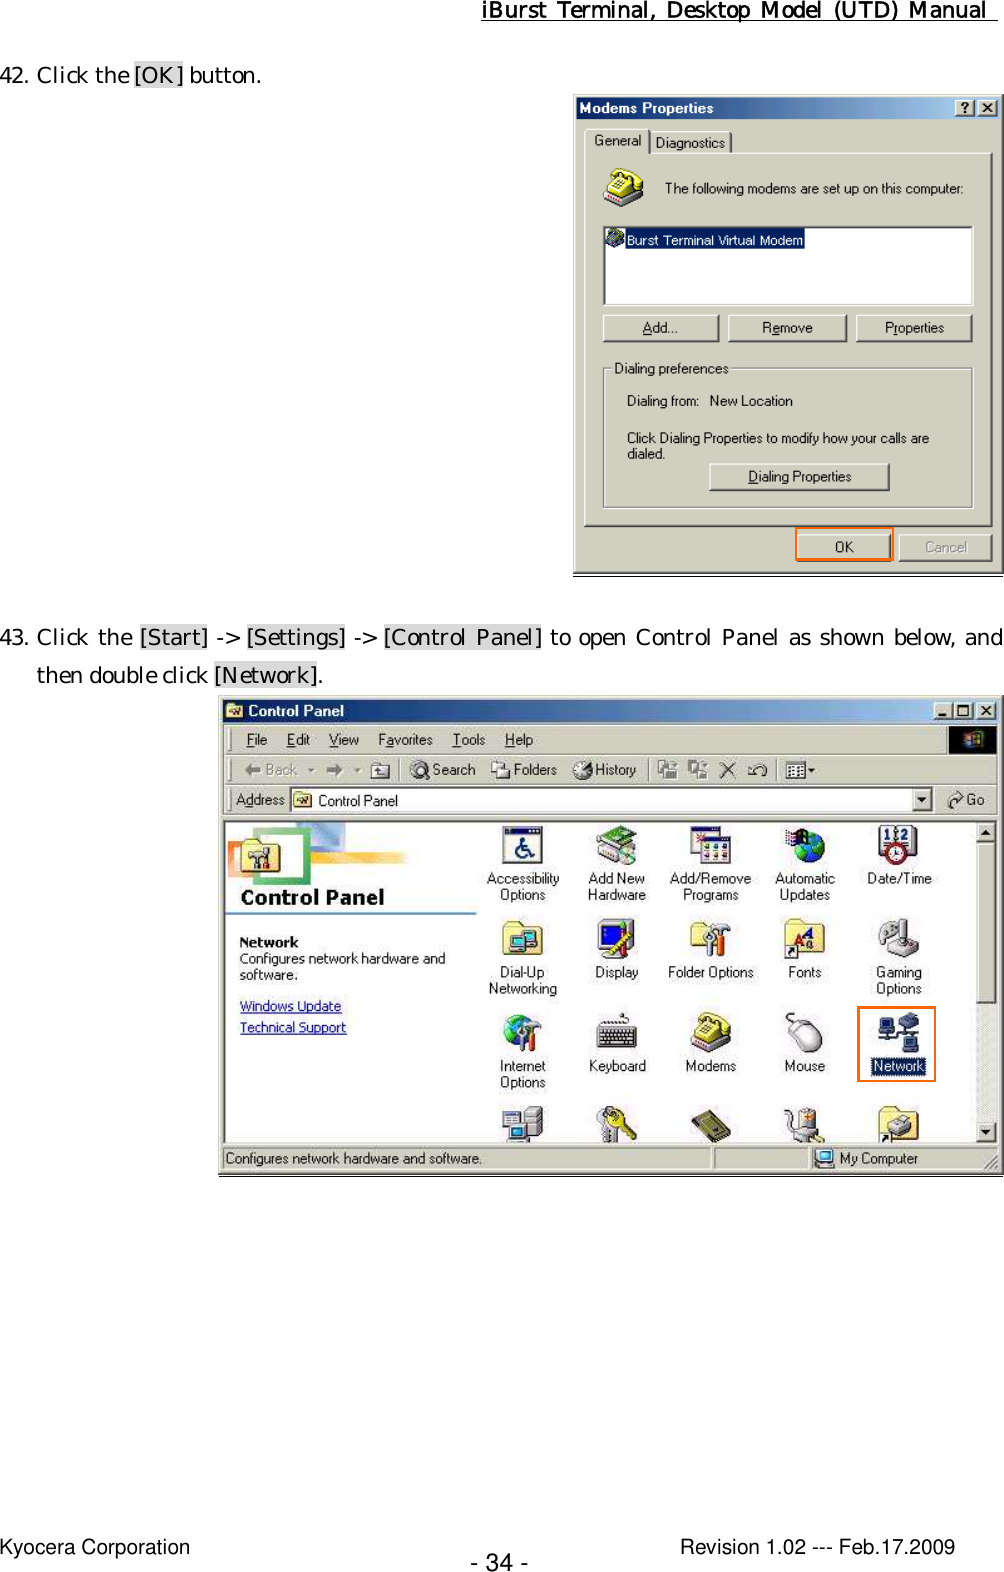 iBurst  Terminal, Desktop  Model  (UTD)  Manual    Kyocera Corporation                                                                                              Revision 1.02 --- Feb.17.2009 - 34 - 42. Click the [OK] button.   43. Click the [Start] -&gt; [Settings] -&gt; [Control Panel] to open Control Panel as shown below, and then double click [Network].   